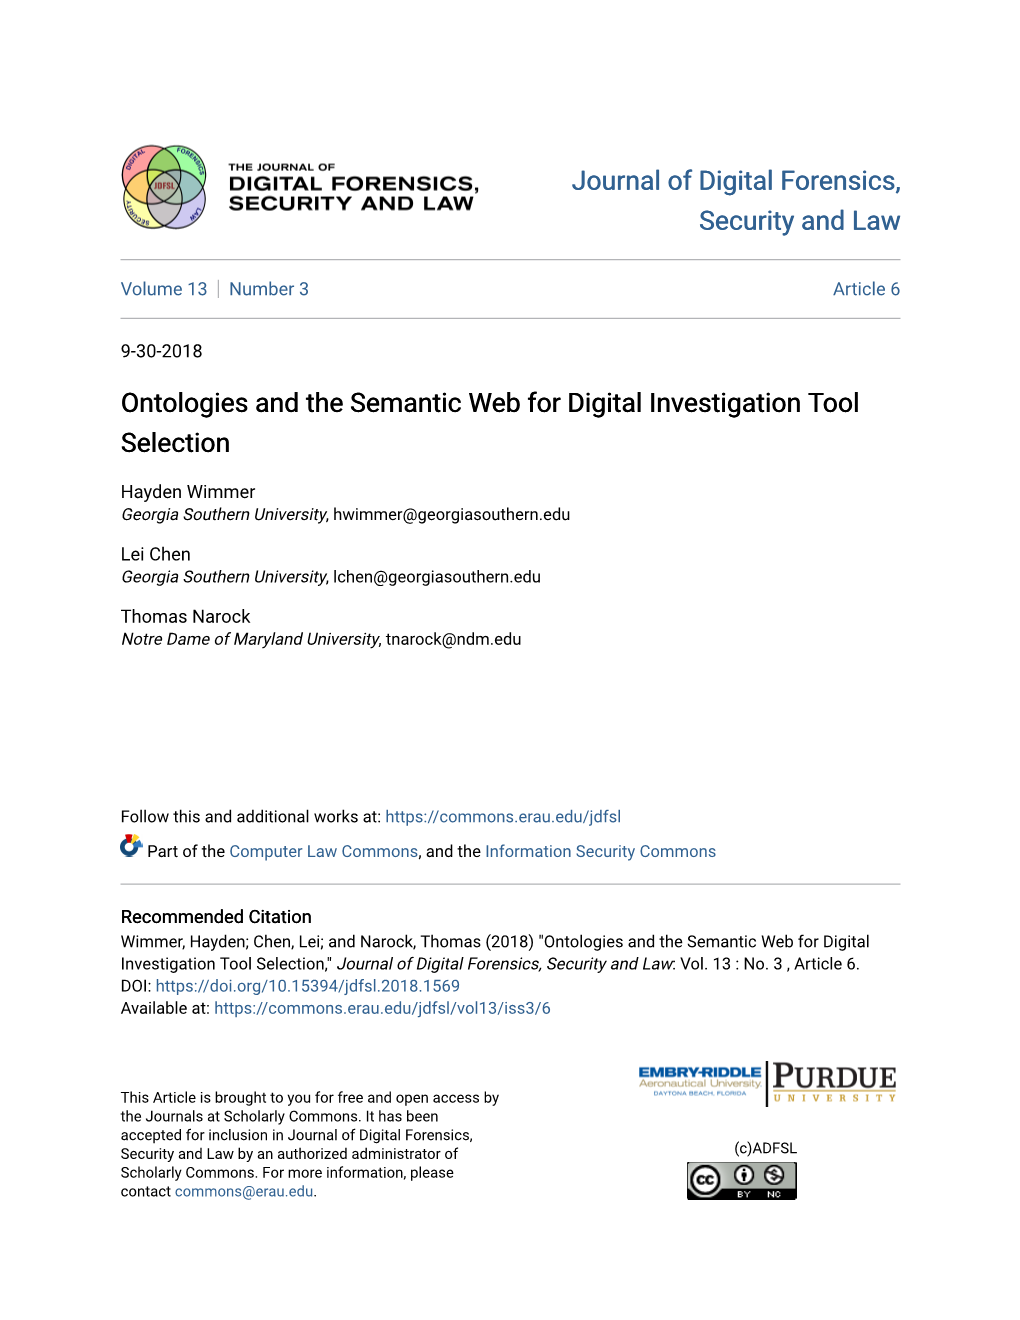 Ontologies and the Semantic Web for Digital Investigation Tool Selection